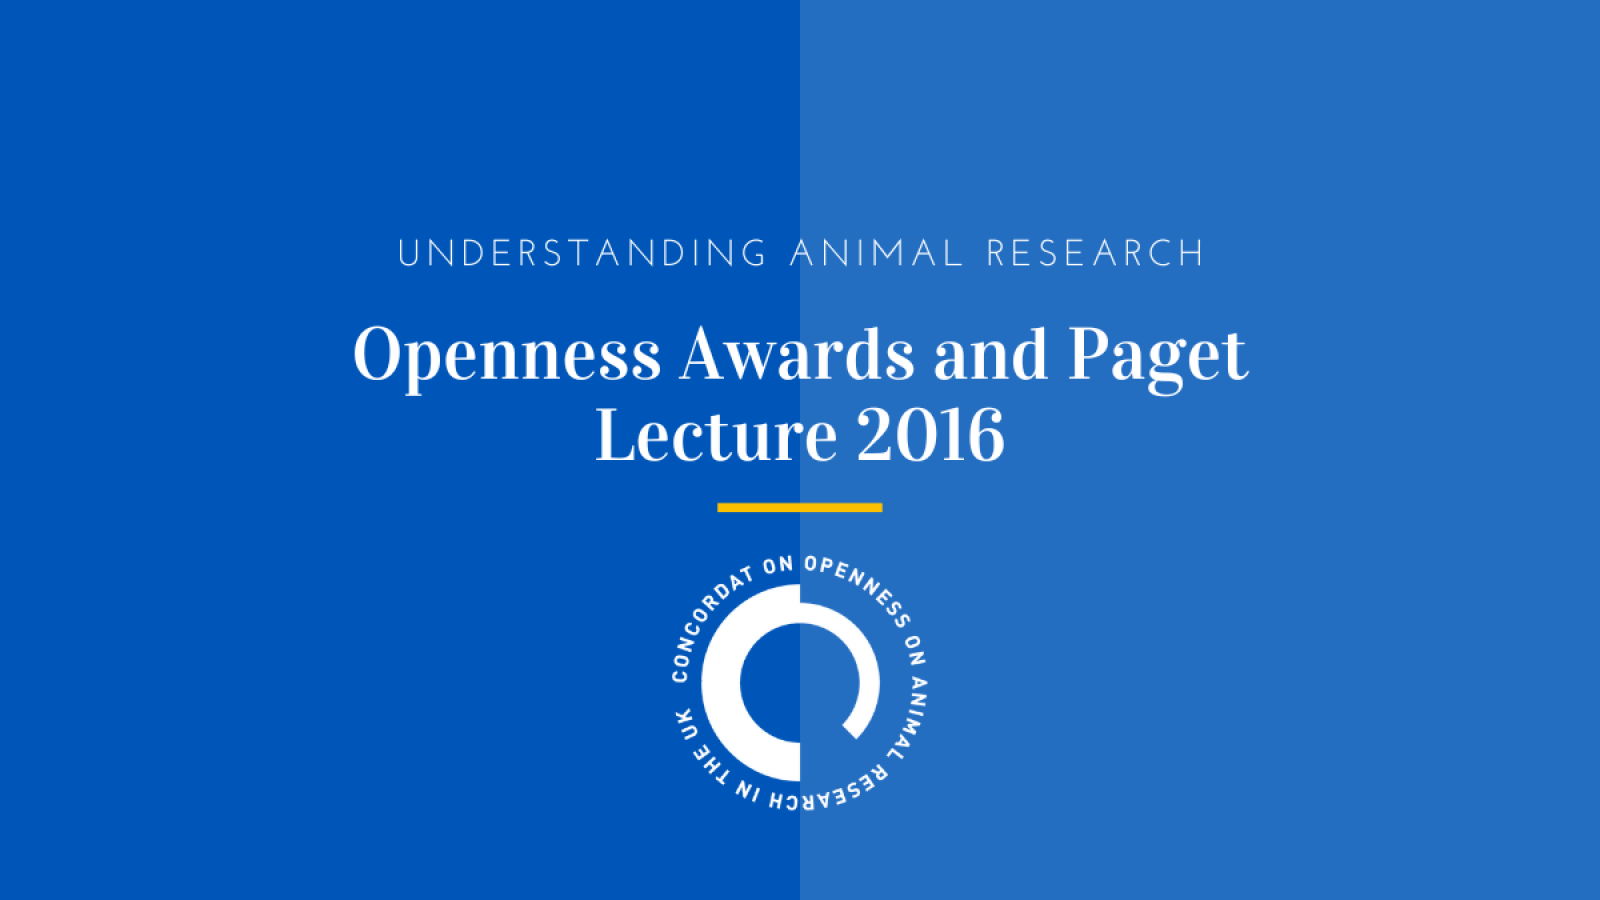 Openness Awards and Paget Lecture 2016